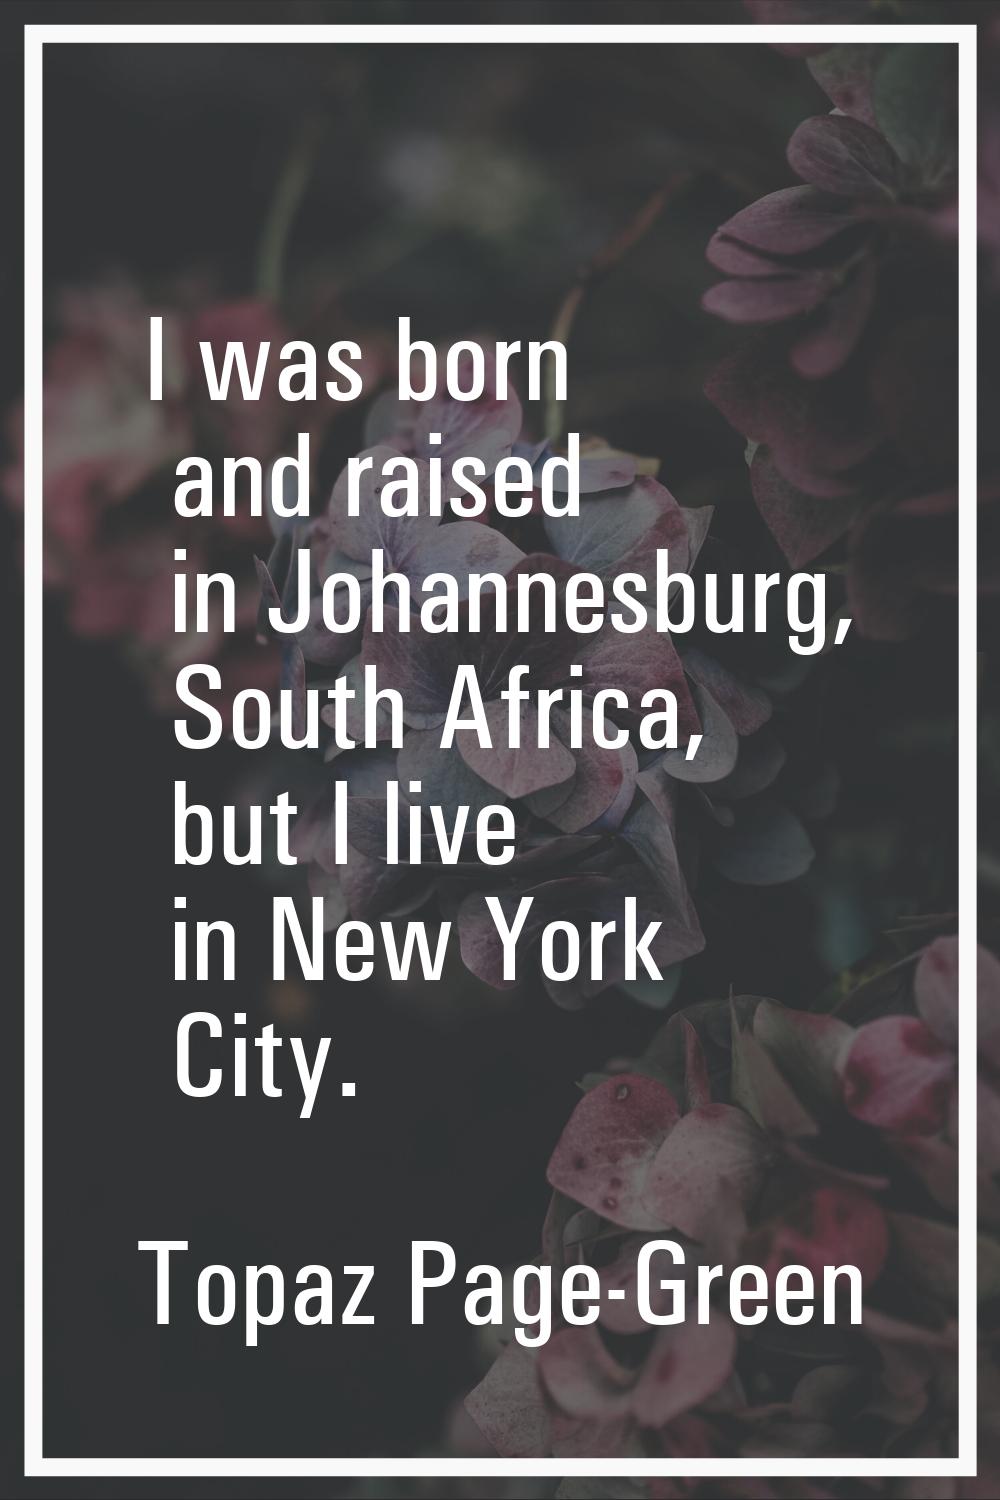 I was born and raised in Johannesburg, South Africa, but I live in New York City.